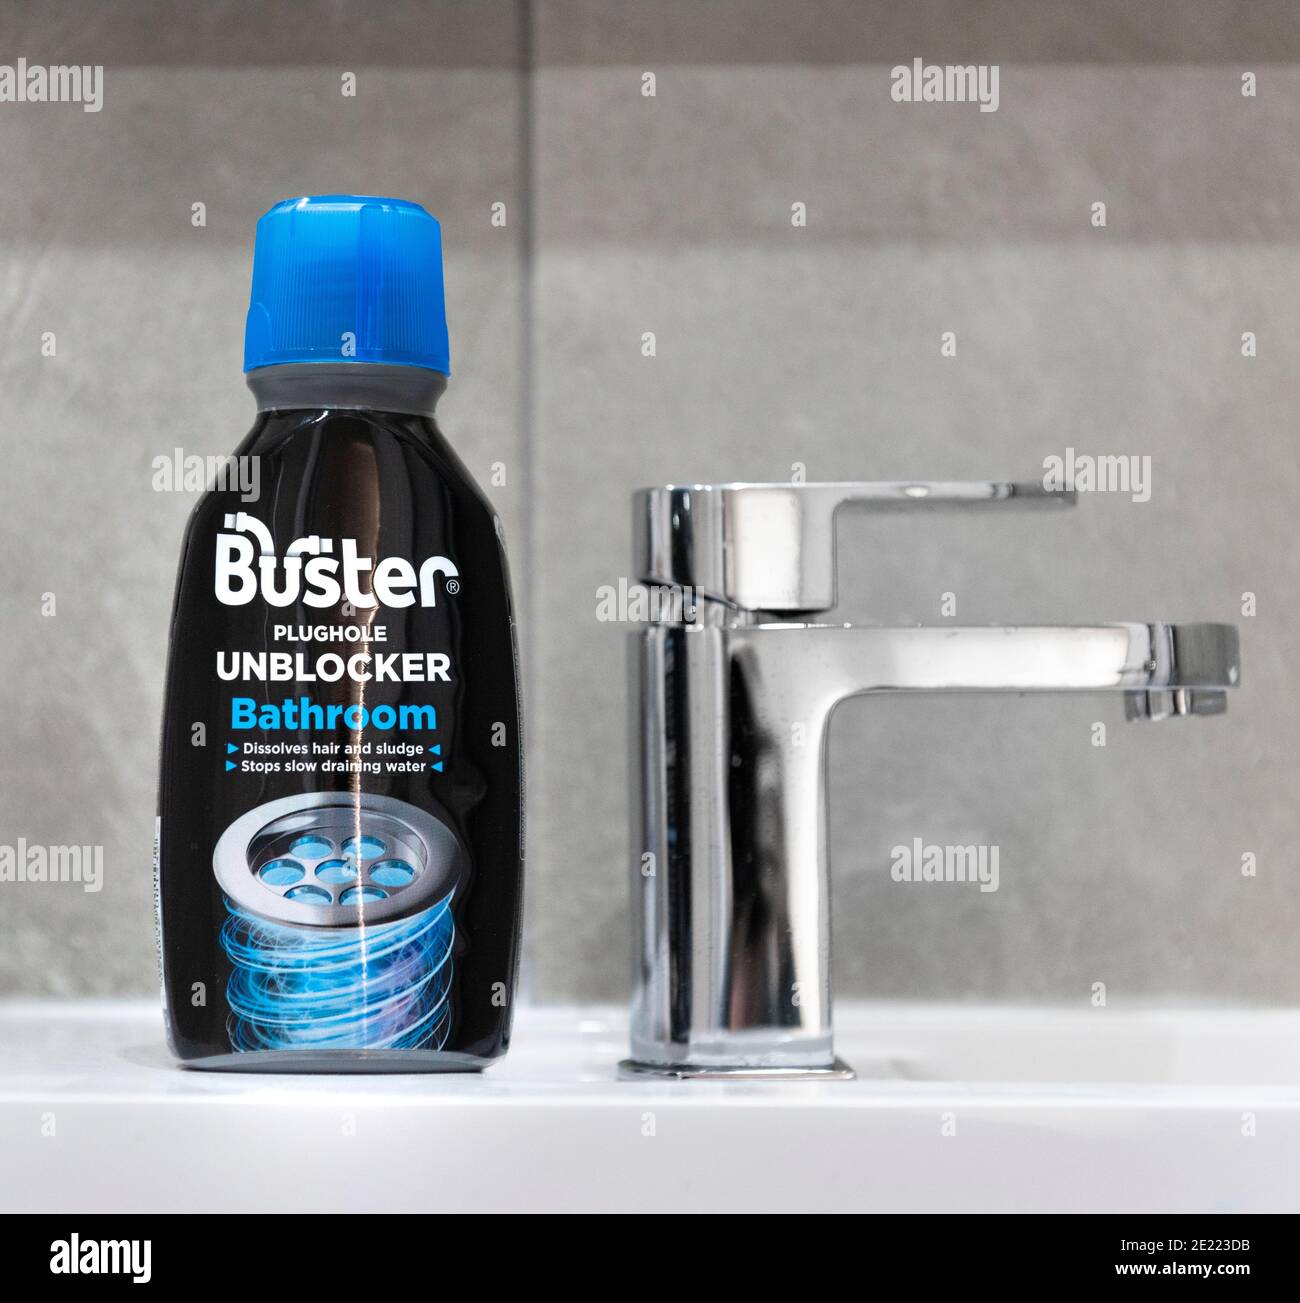 Buster plughole unblocker for bathrooms in a tiled background Stock Photo